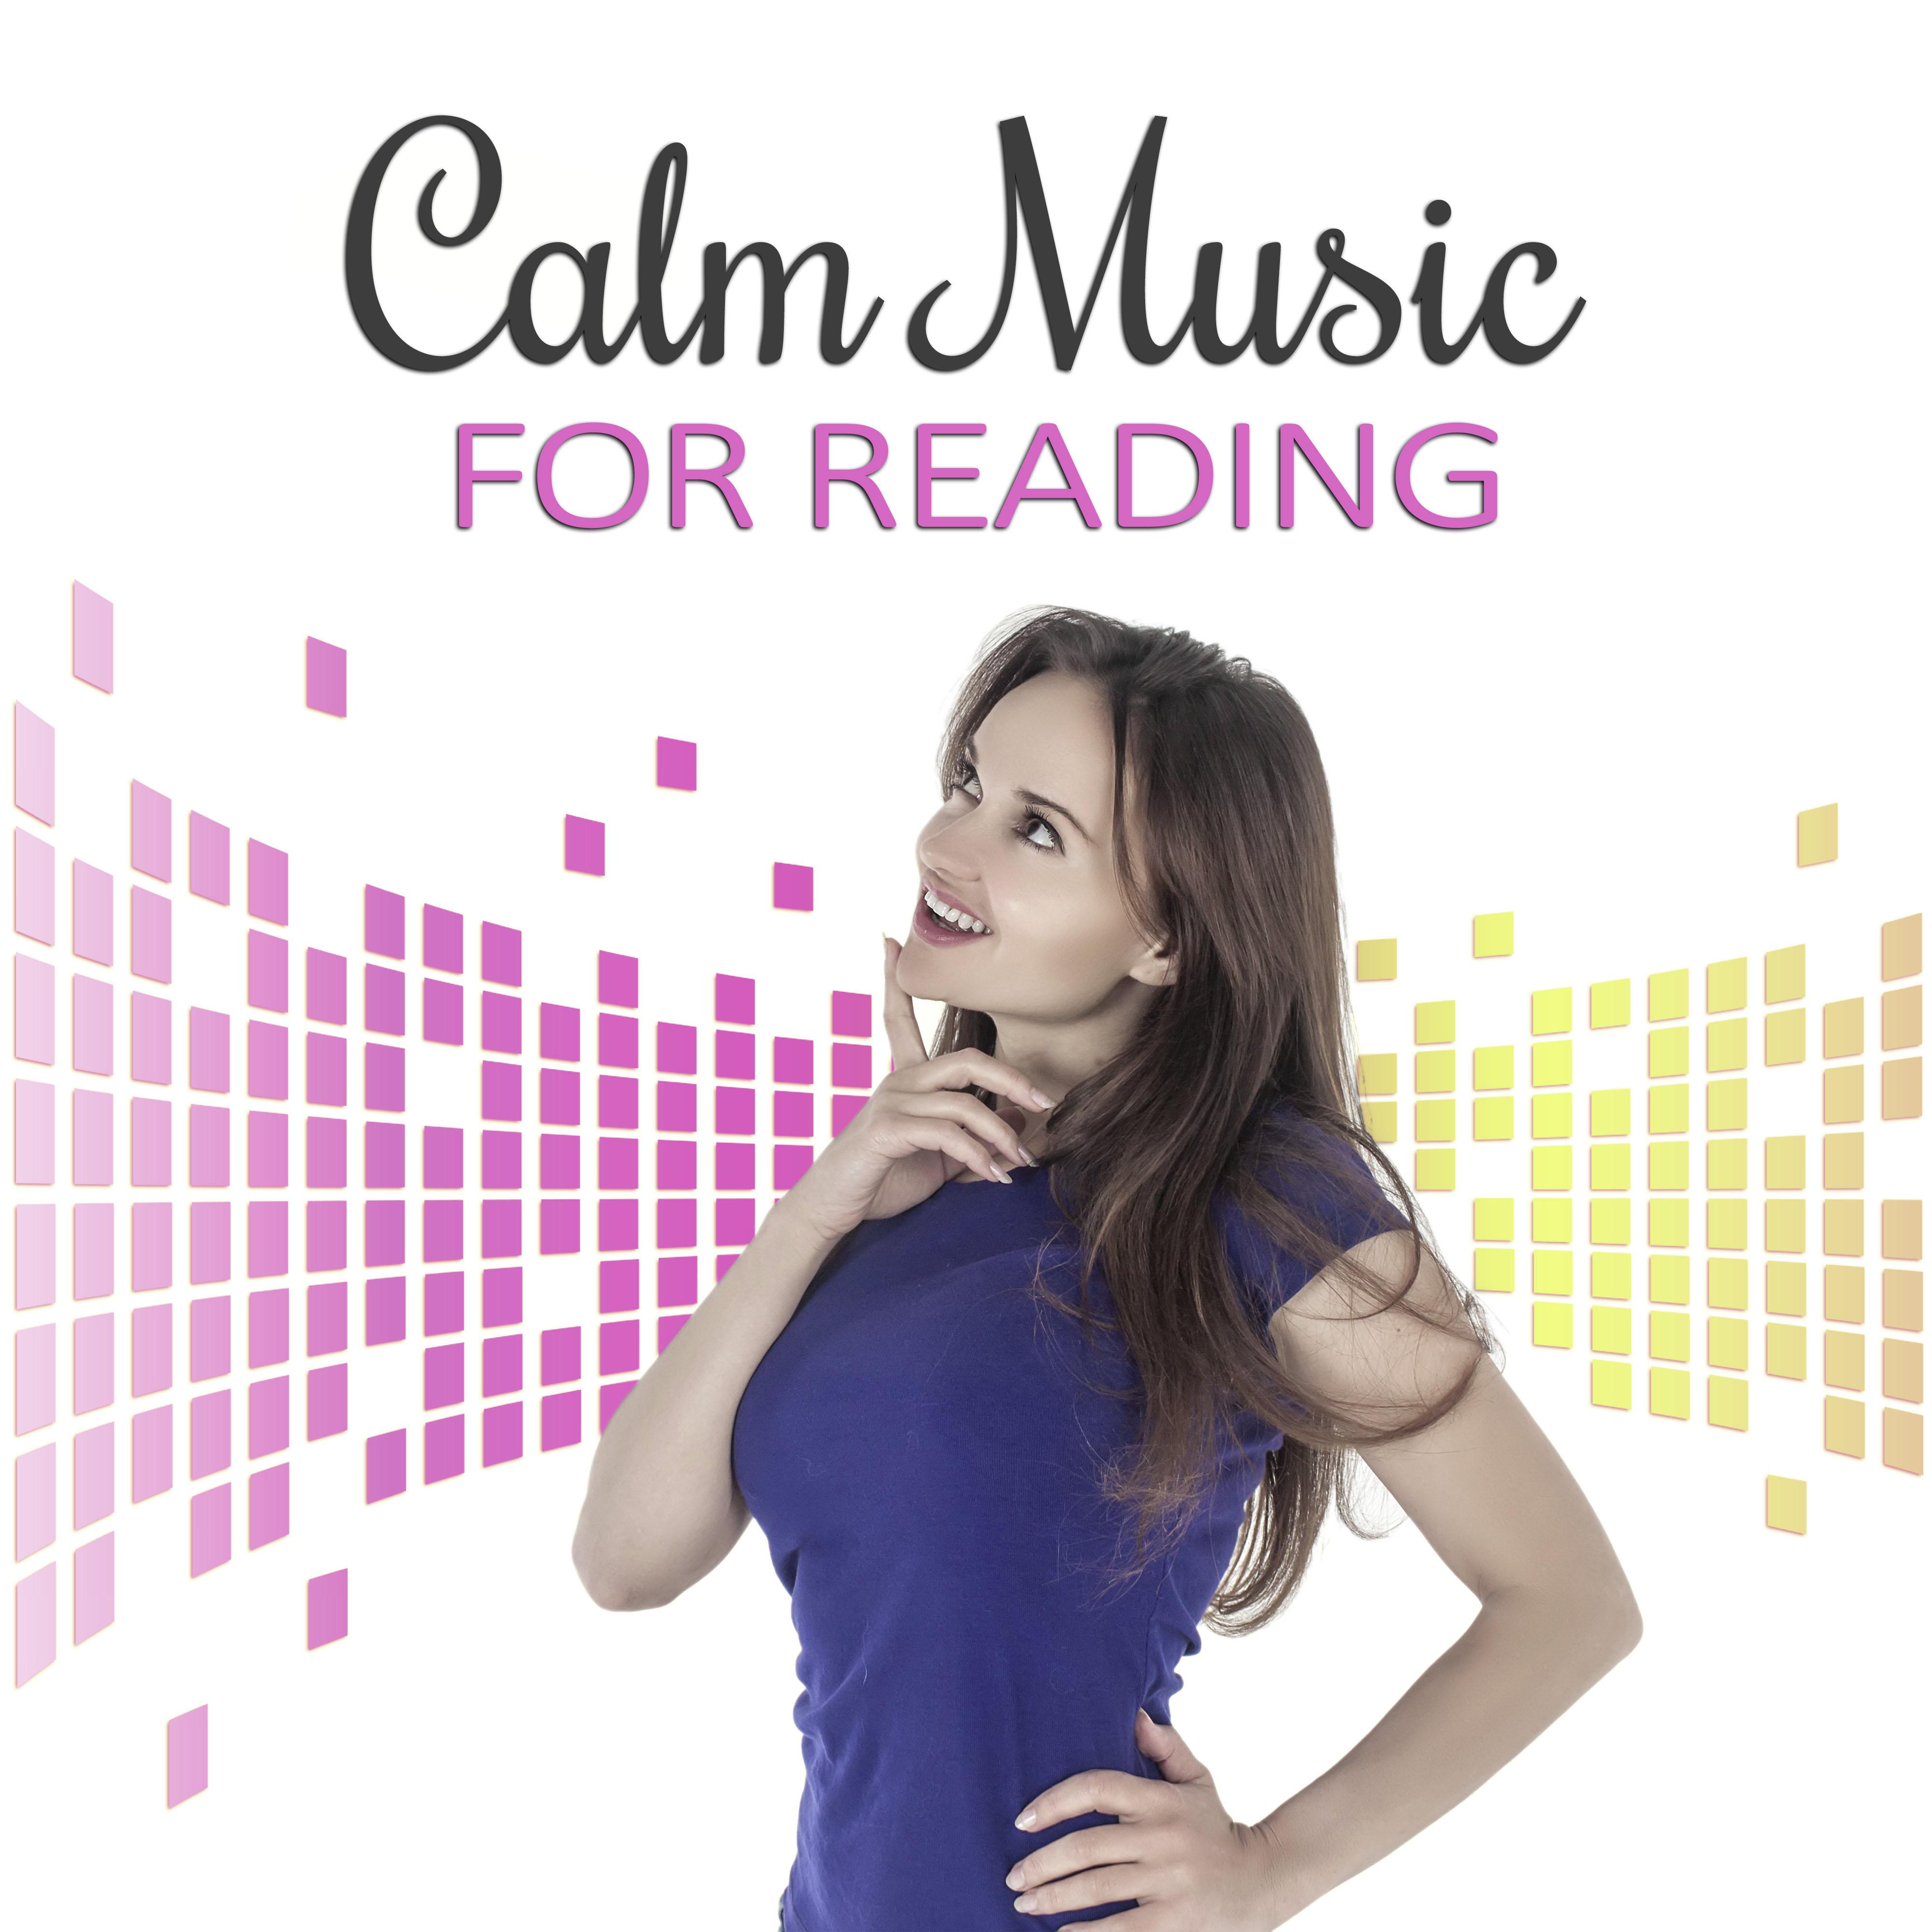 Calm Music for Reading  Relaxing Music, New Age, Fast Study, Deep Sounds for Concentration, Brain Power, Sounds of Nature, Clear the Mind, Exam Study